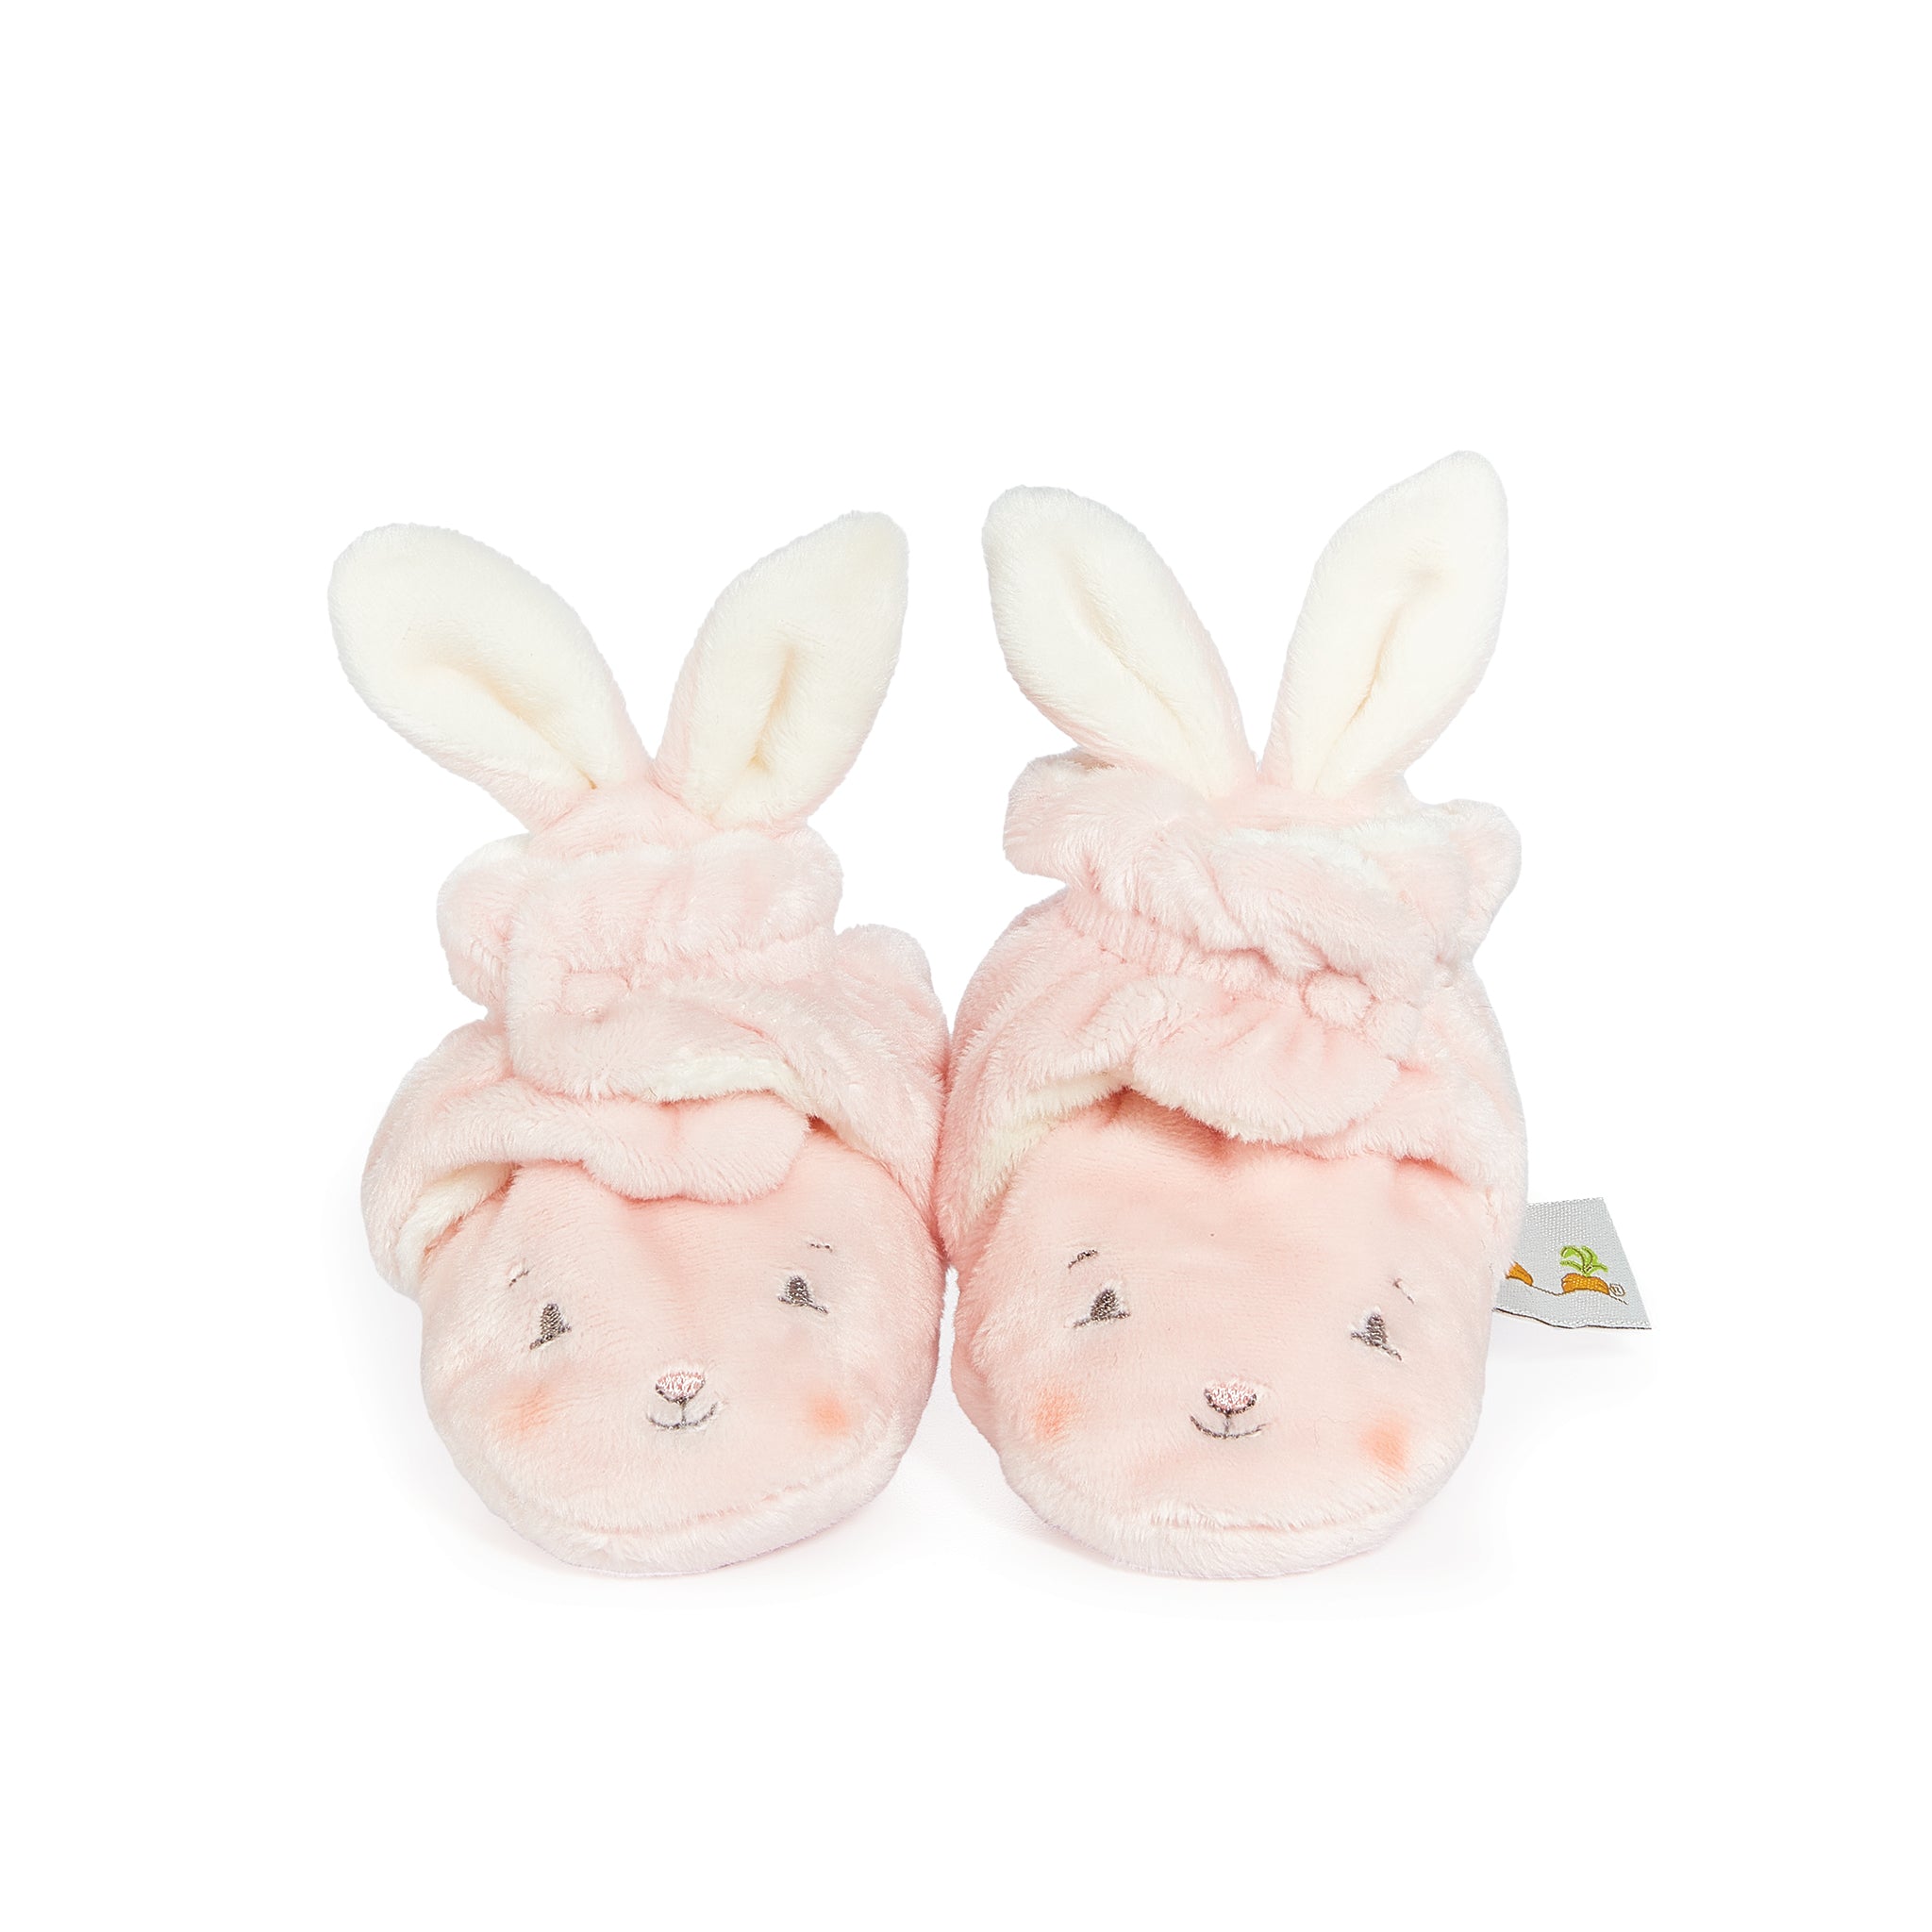 Bunny Hoppy Feet Slippers | Pink Baby Slippers | Baby Clothes - Bunnies By The